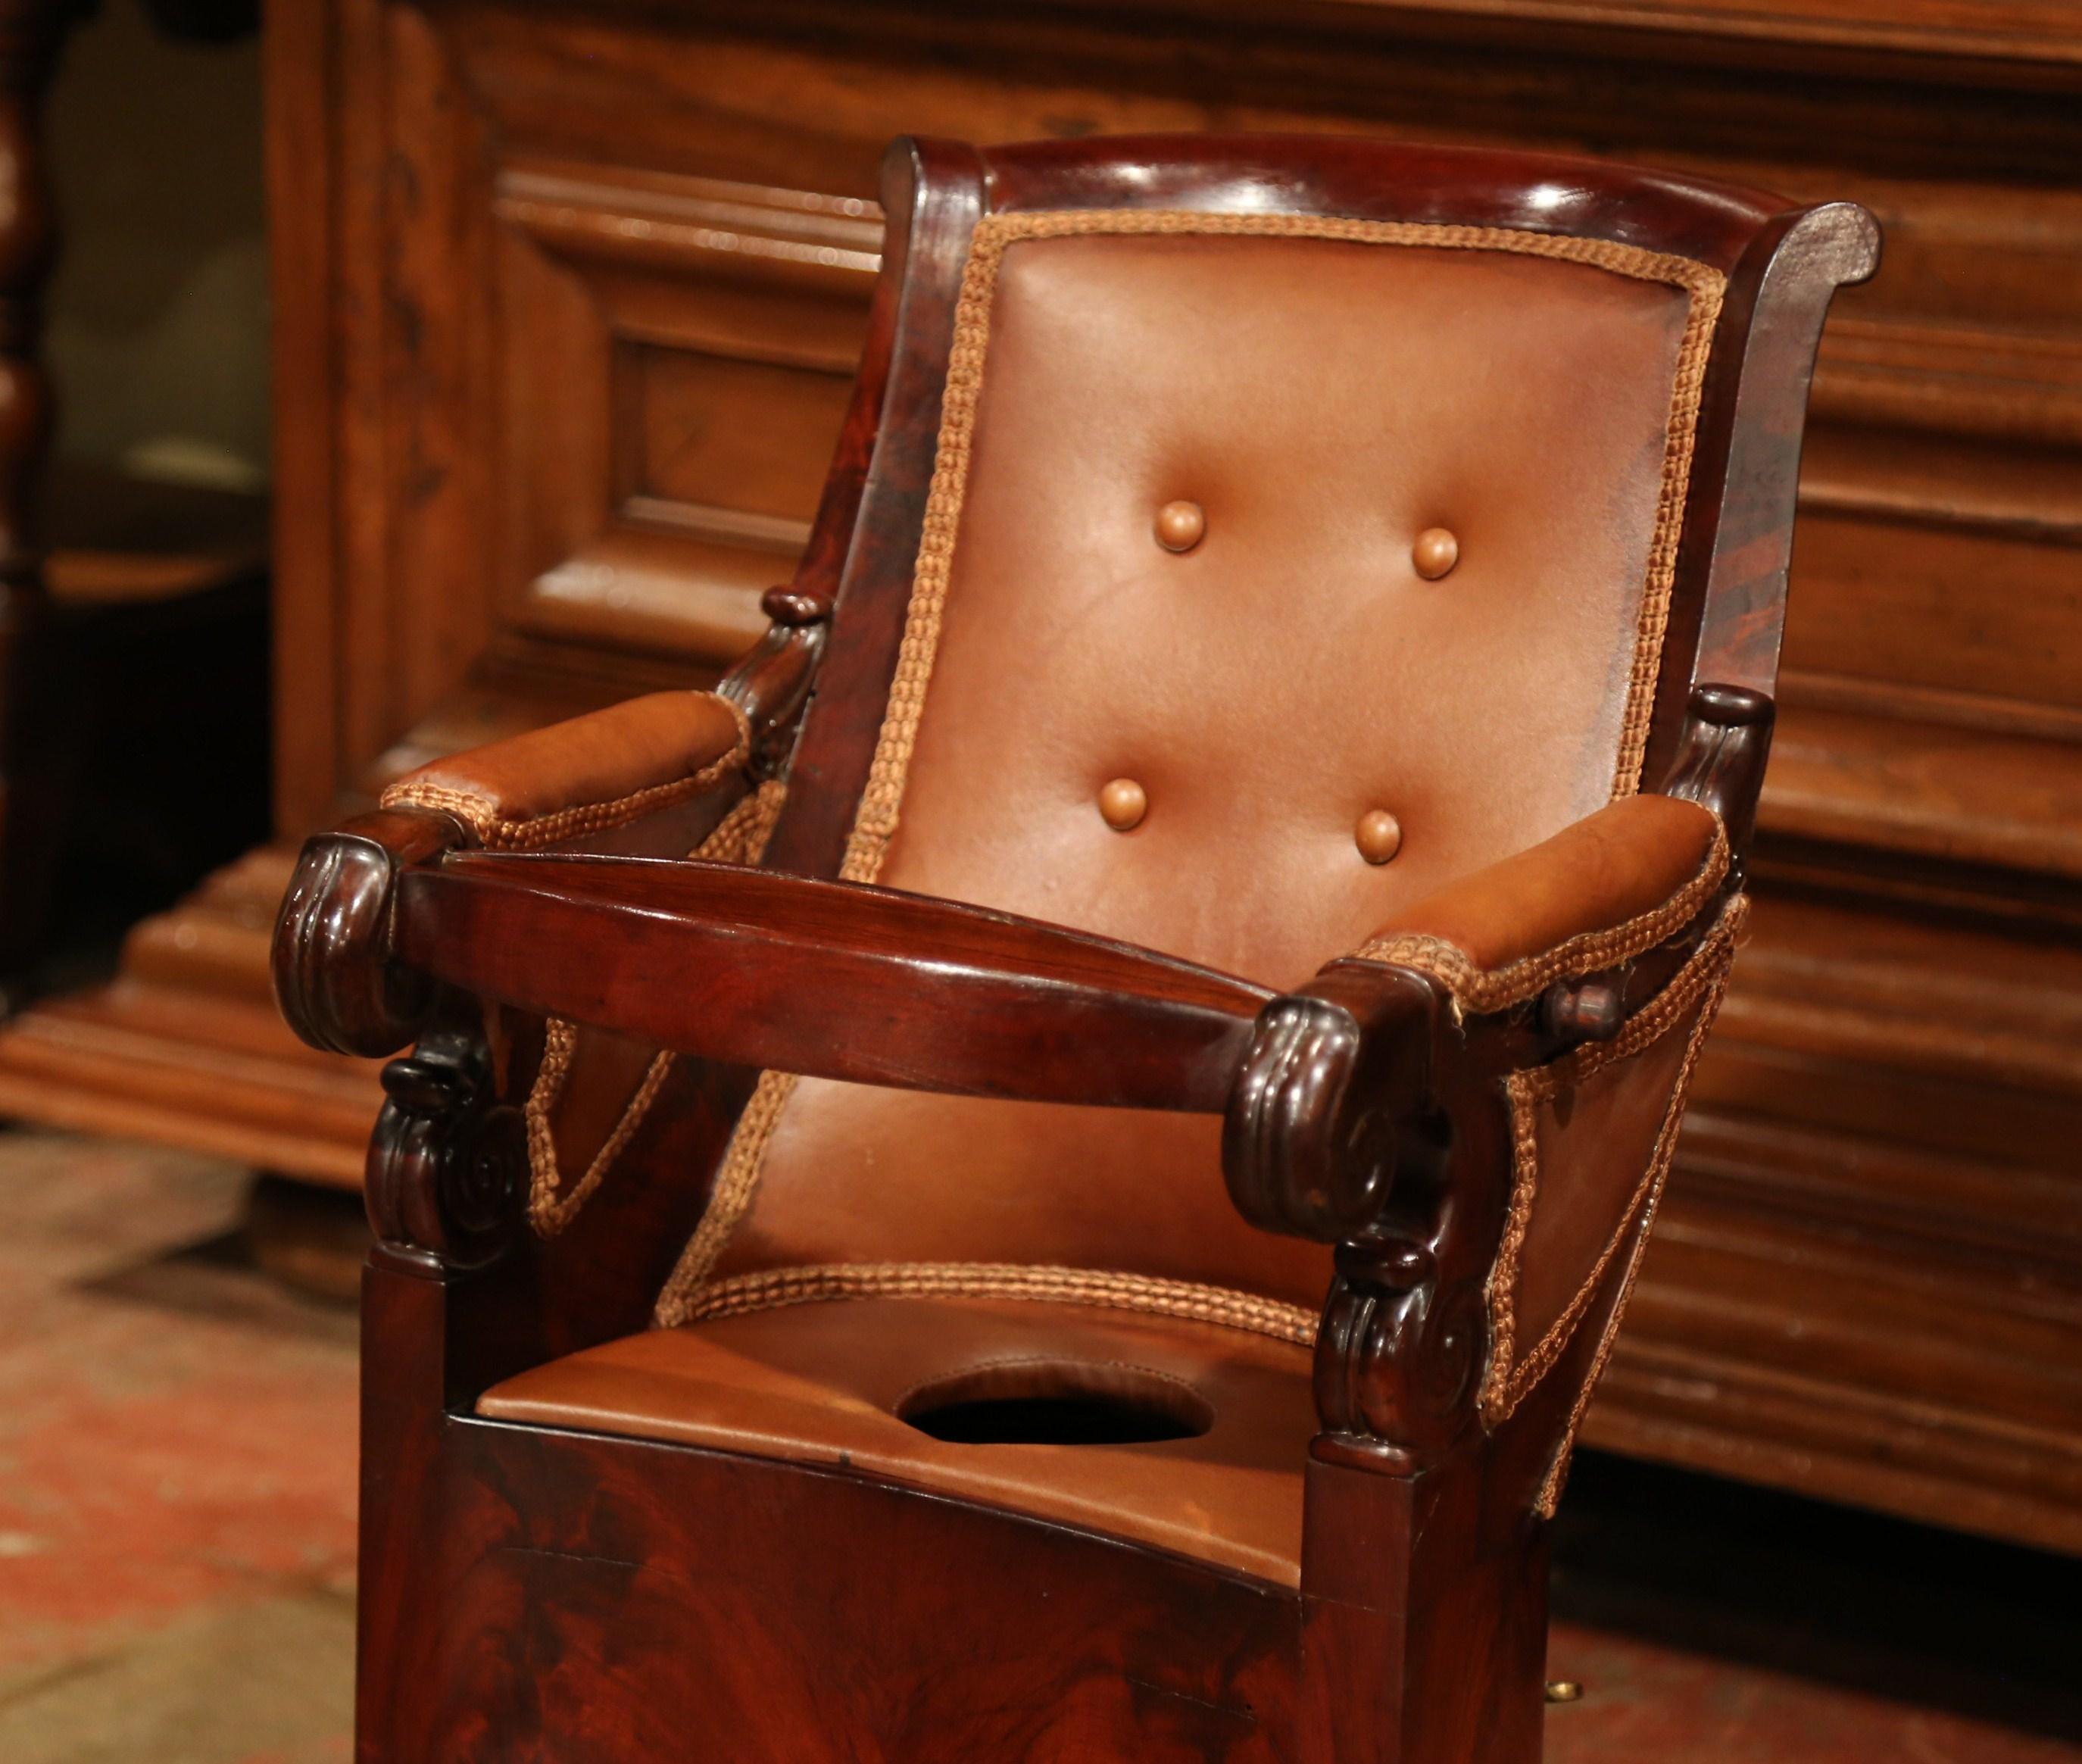 Bring royalty and elegance to your home with this antique baby chair, and treat your child like a king! Crafted in France circa 1870, the mahogany armchair with paw feet and wheels is a treasure on its own, not only does it have a lock mechanism